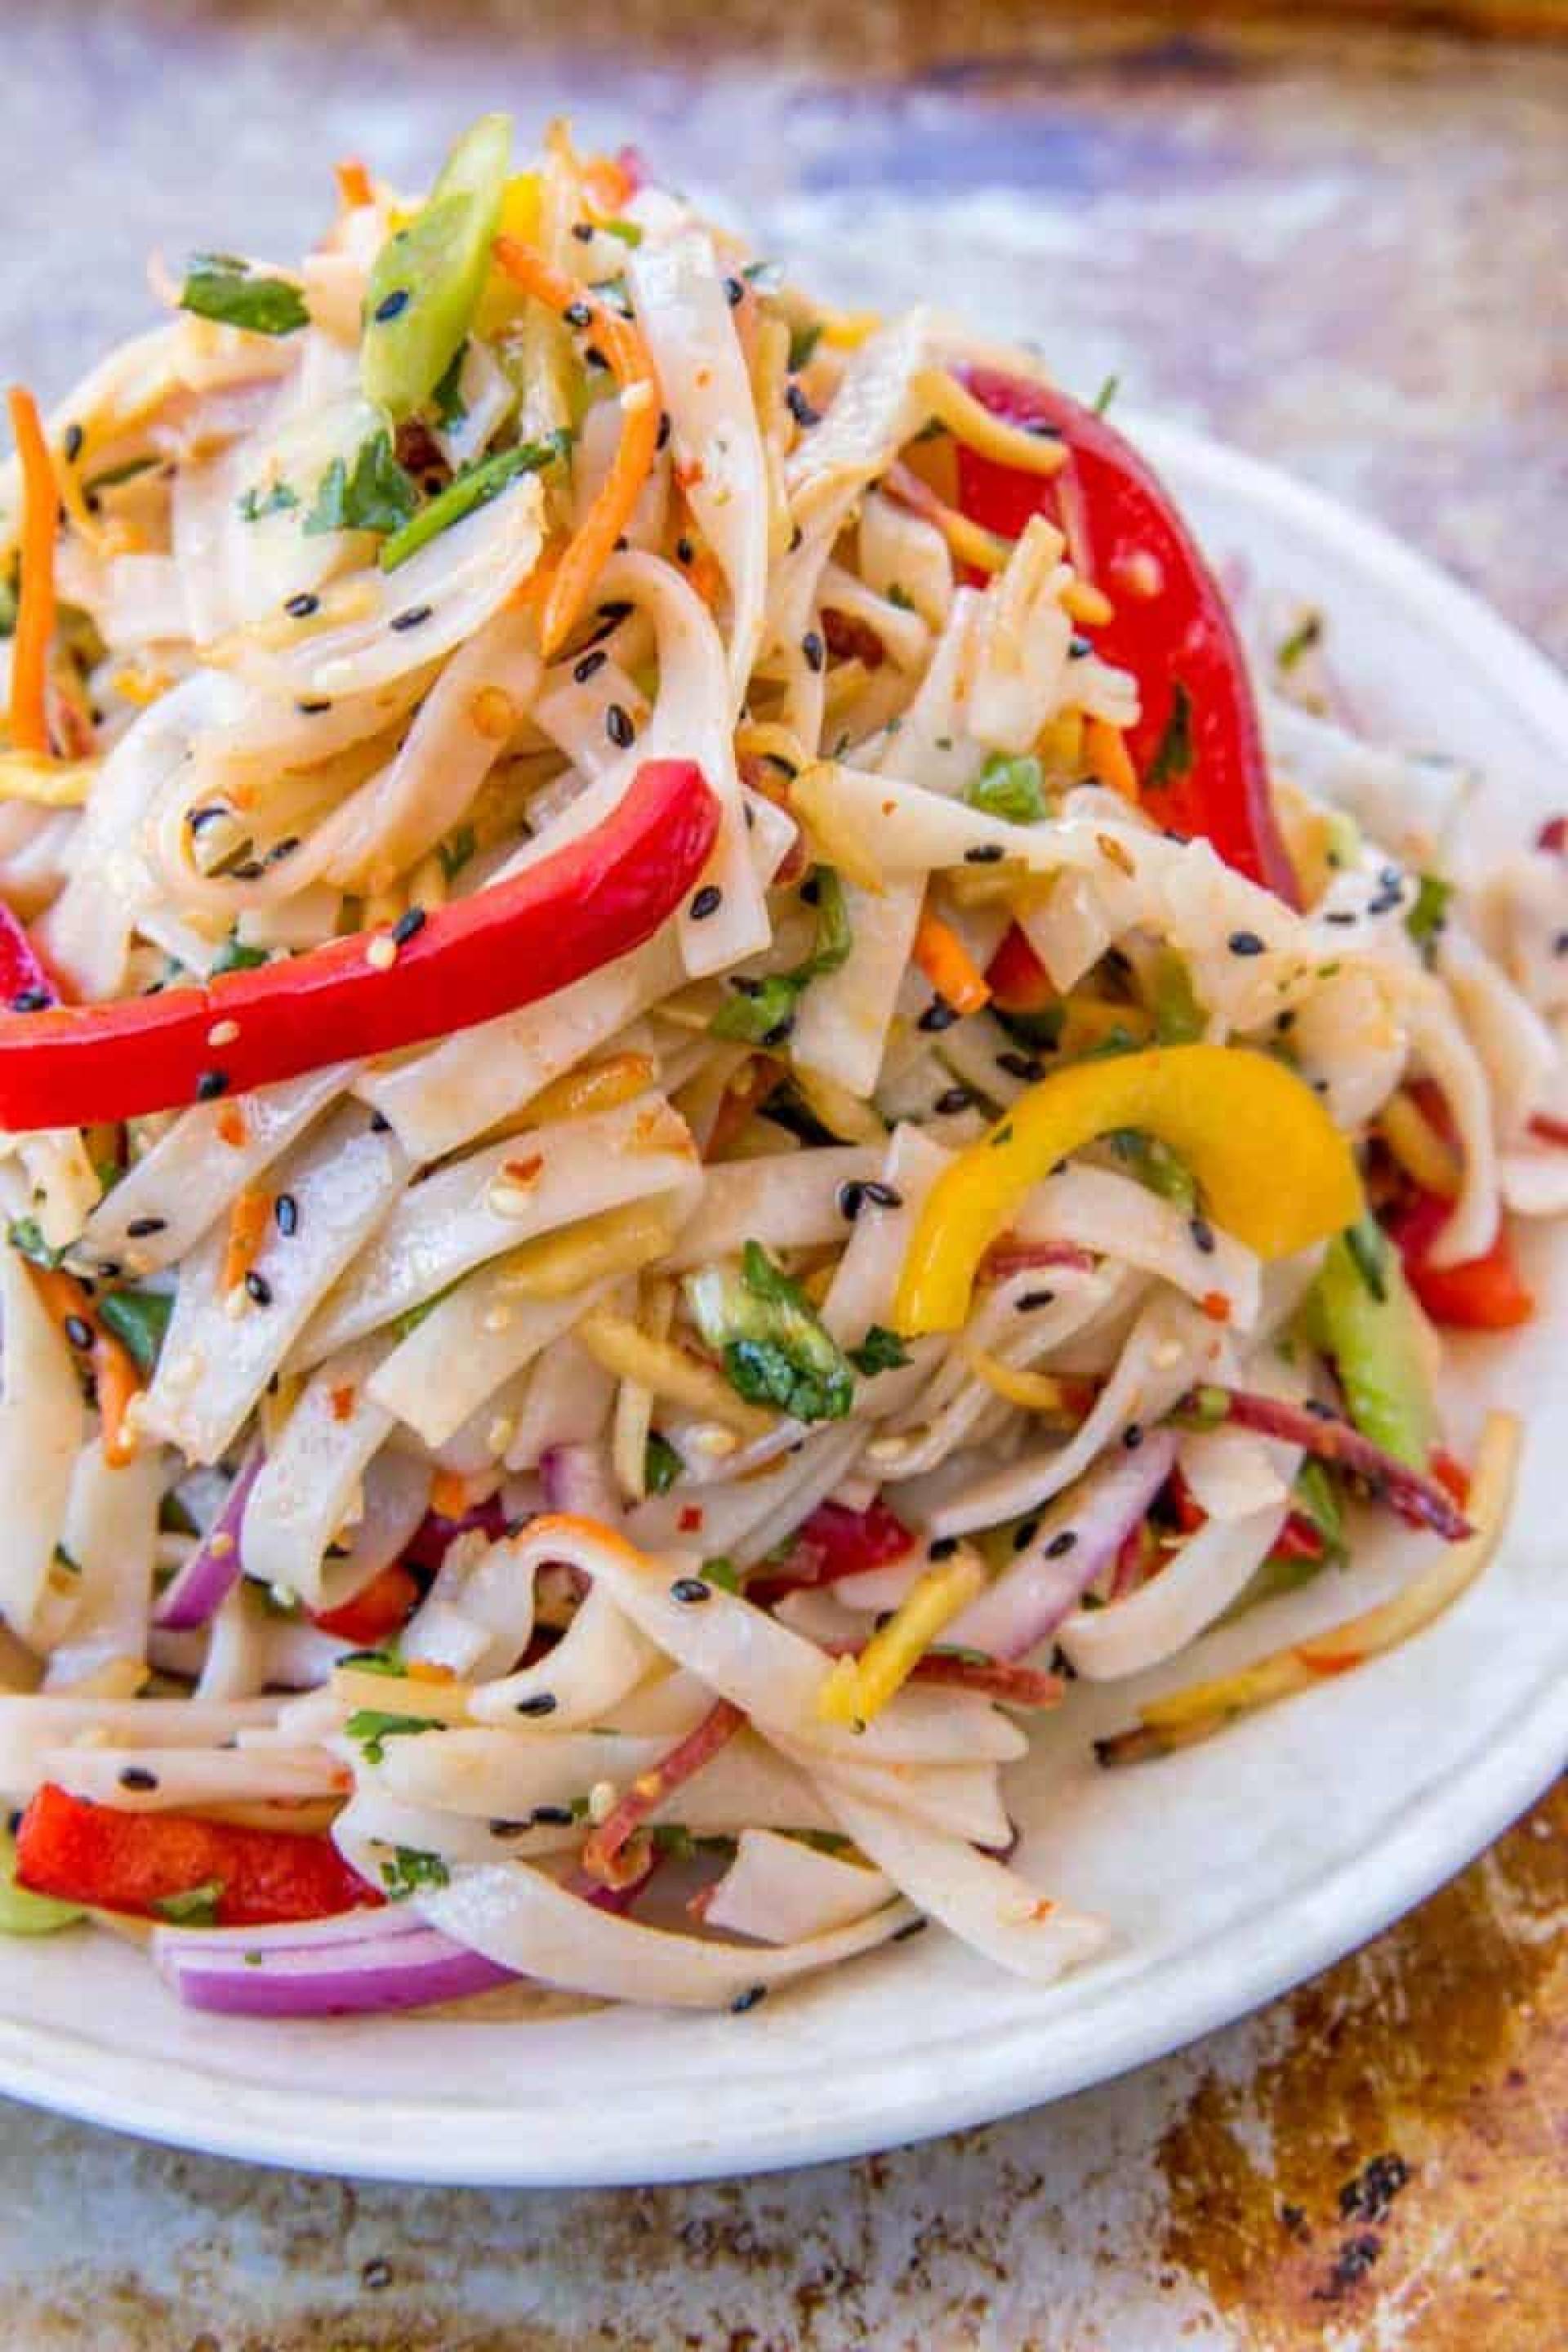 Thai Noodle Salad with Chicken